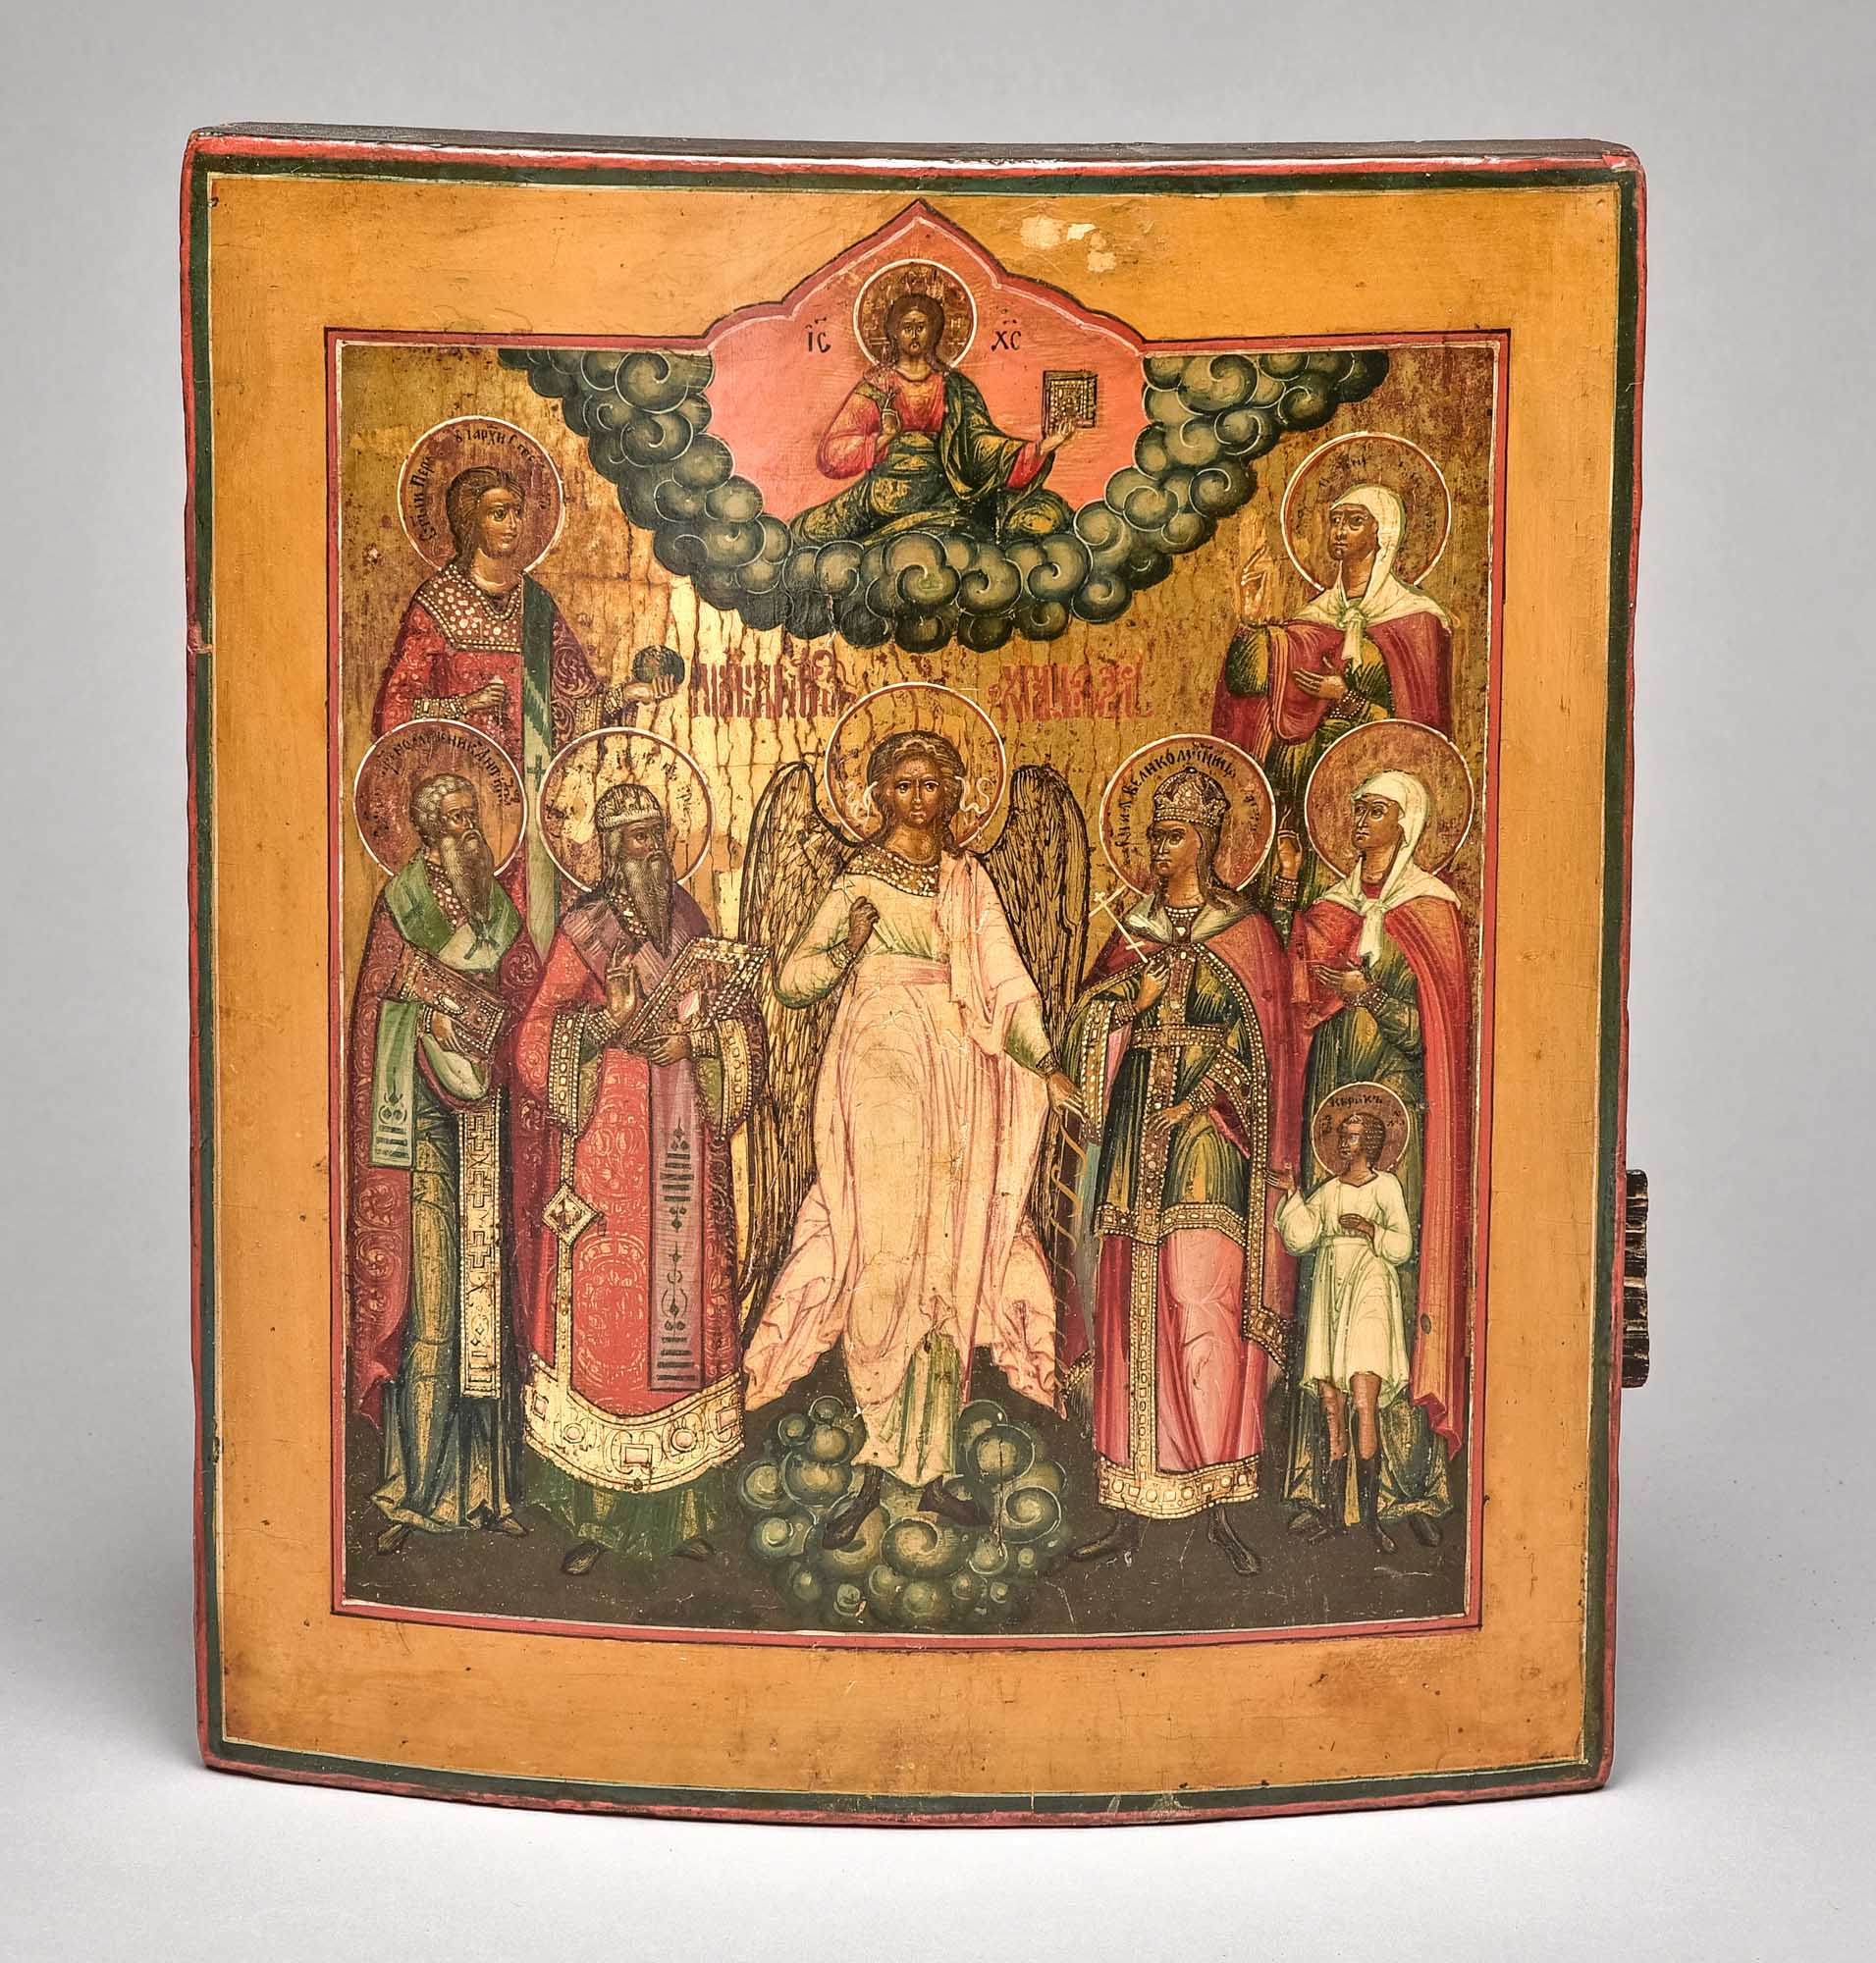 Icon, Russia, 18th/19th century "Archangel Michael with Saints", wood, chalk ground, egg tempera, 3